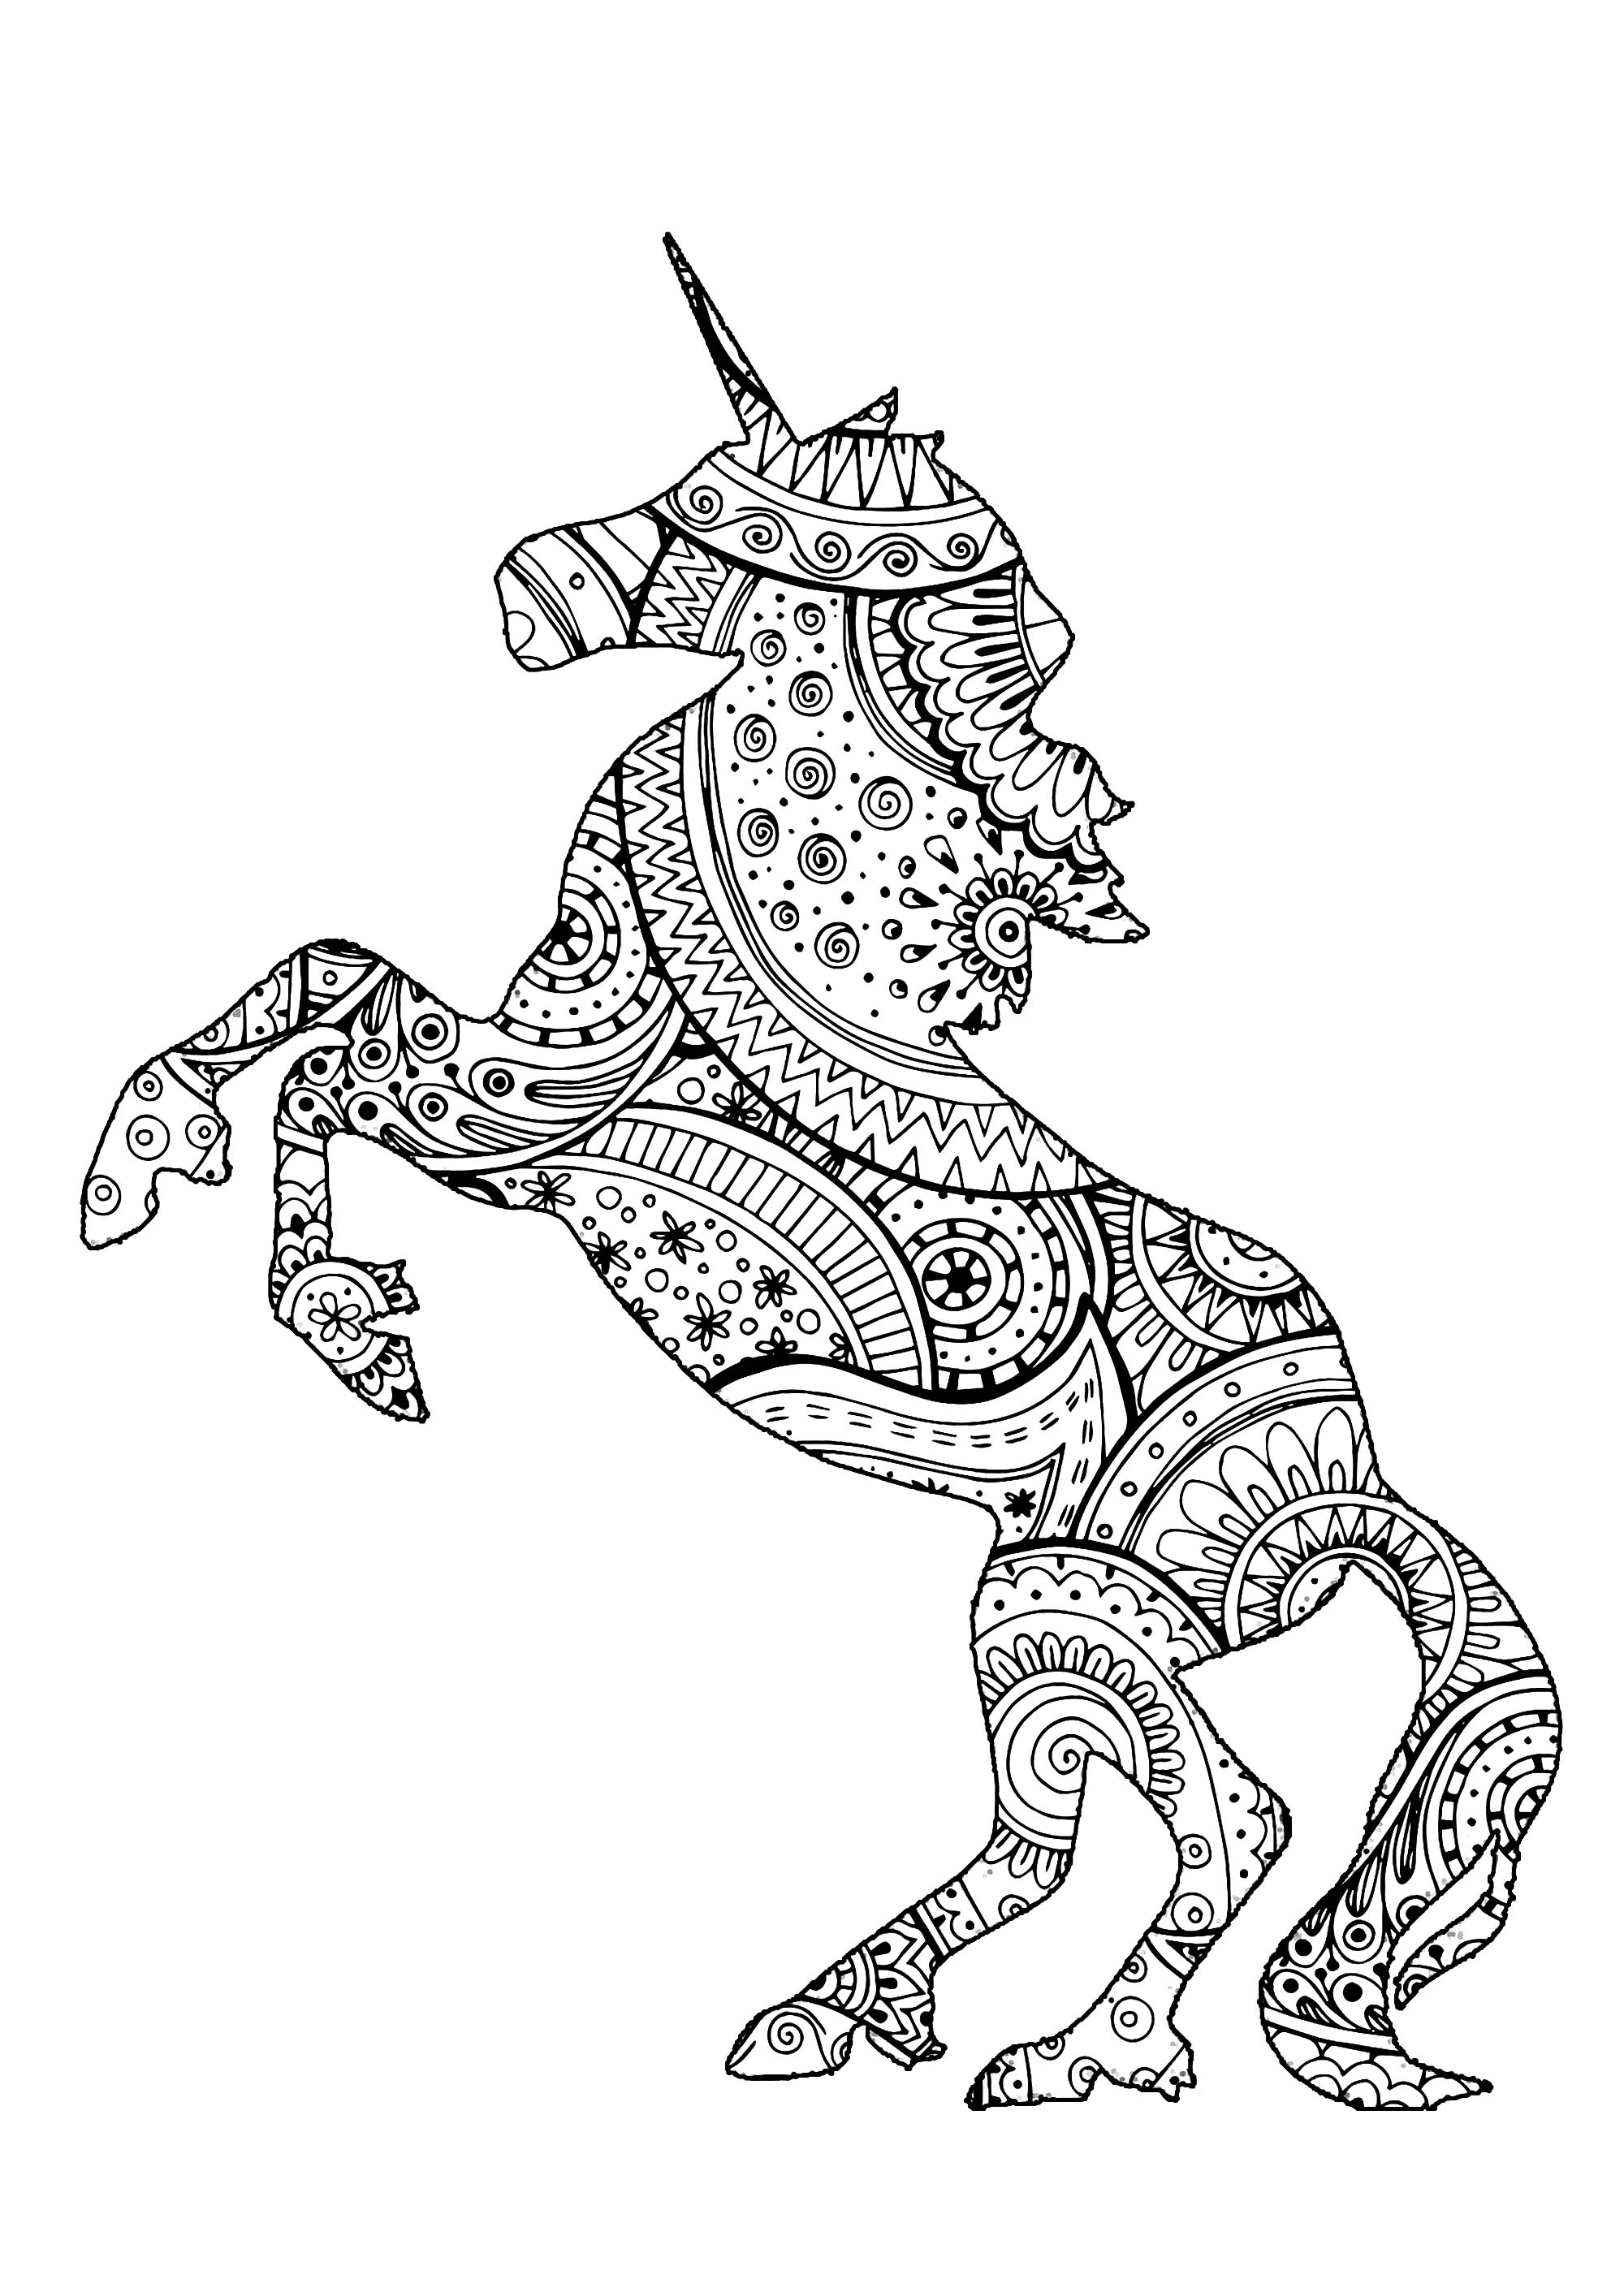 Download Unicorn shape with patterns - Unicorns Adult Coloring Pages